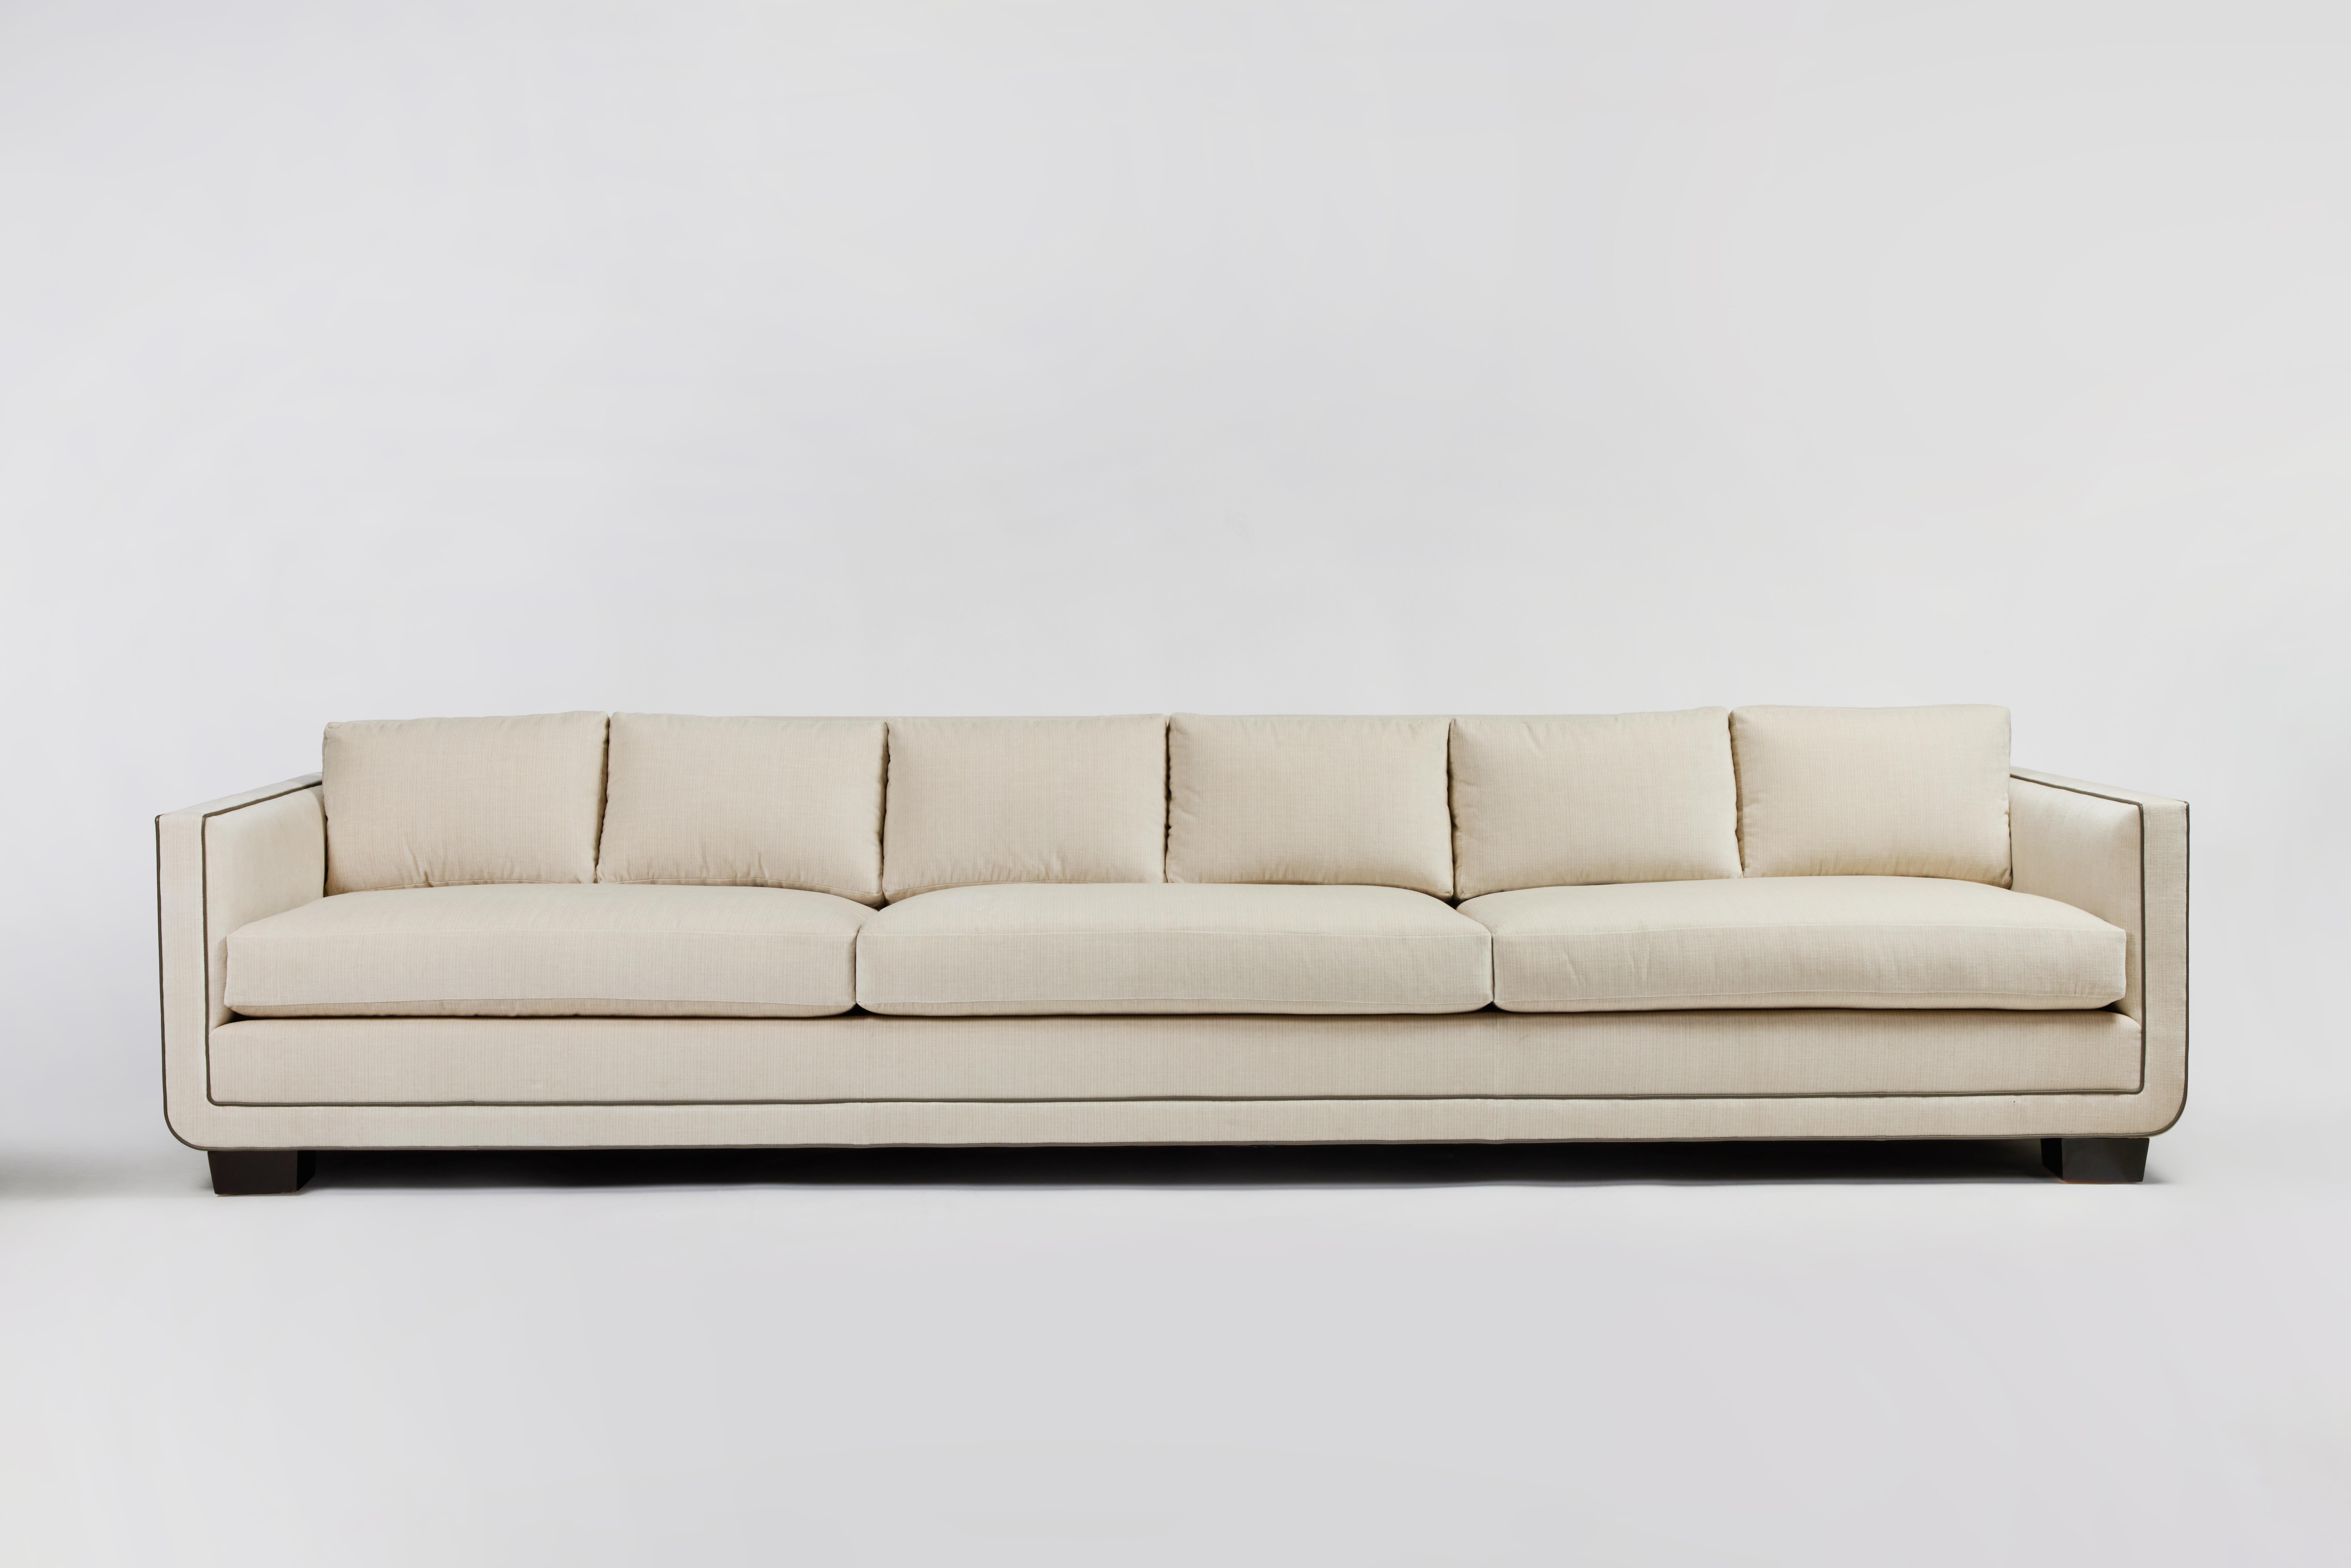 Upholstery Modern Streamlined Sofa with Curved Base Detail by Martin & Brockett, 10ft Long For Sale